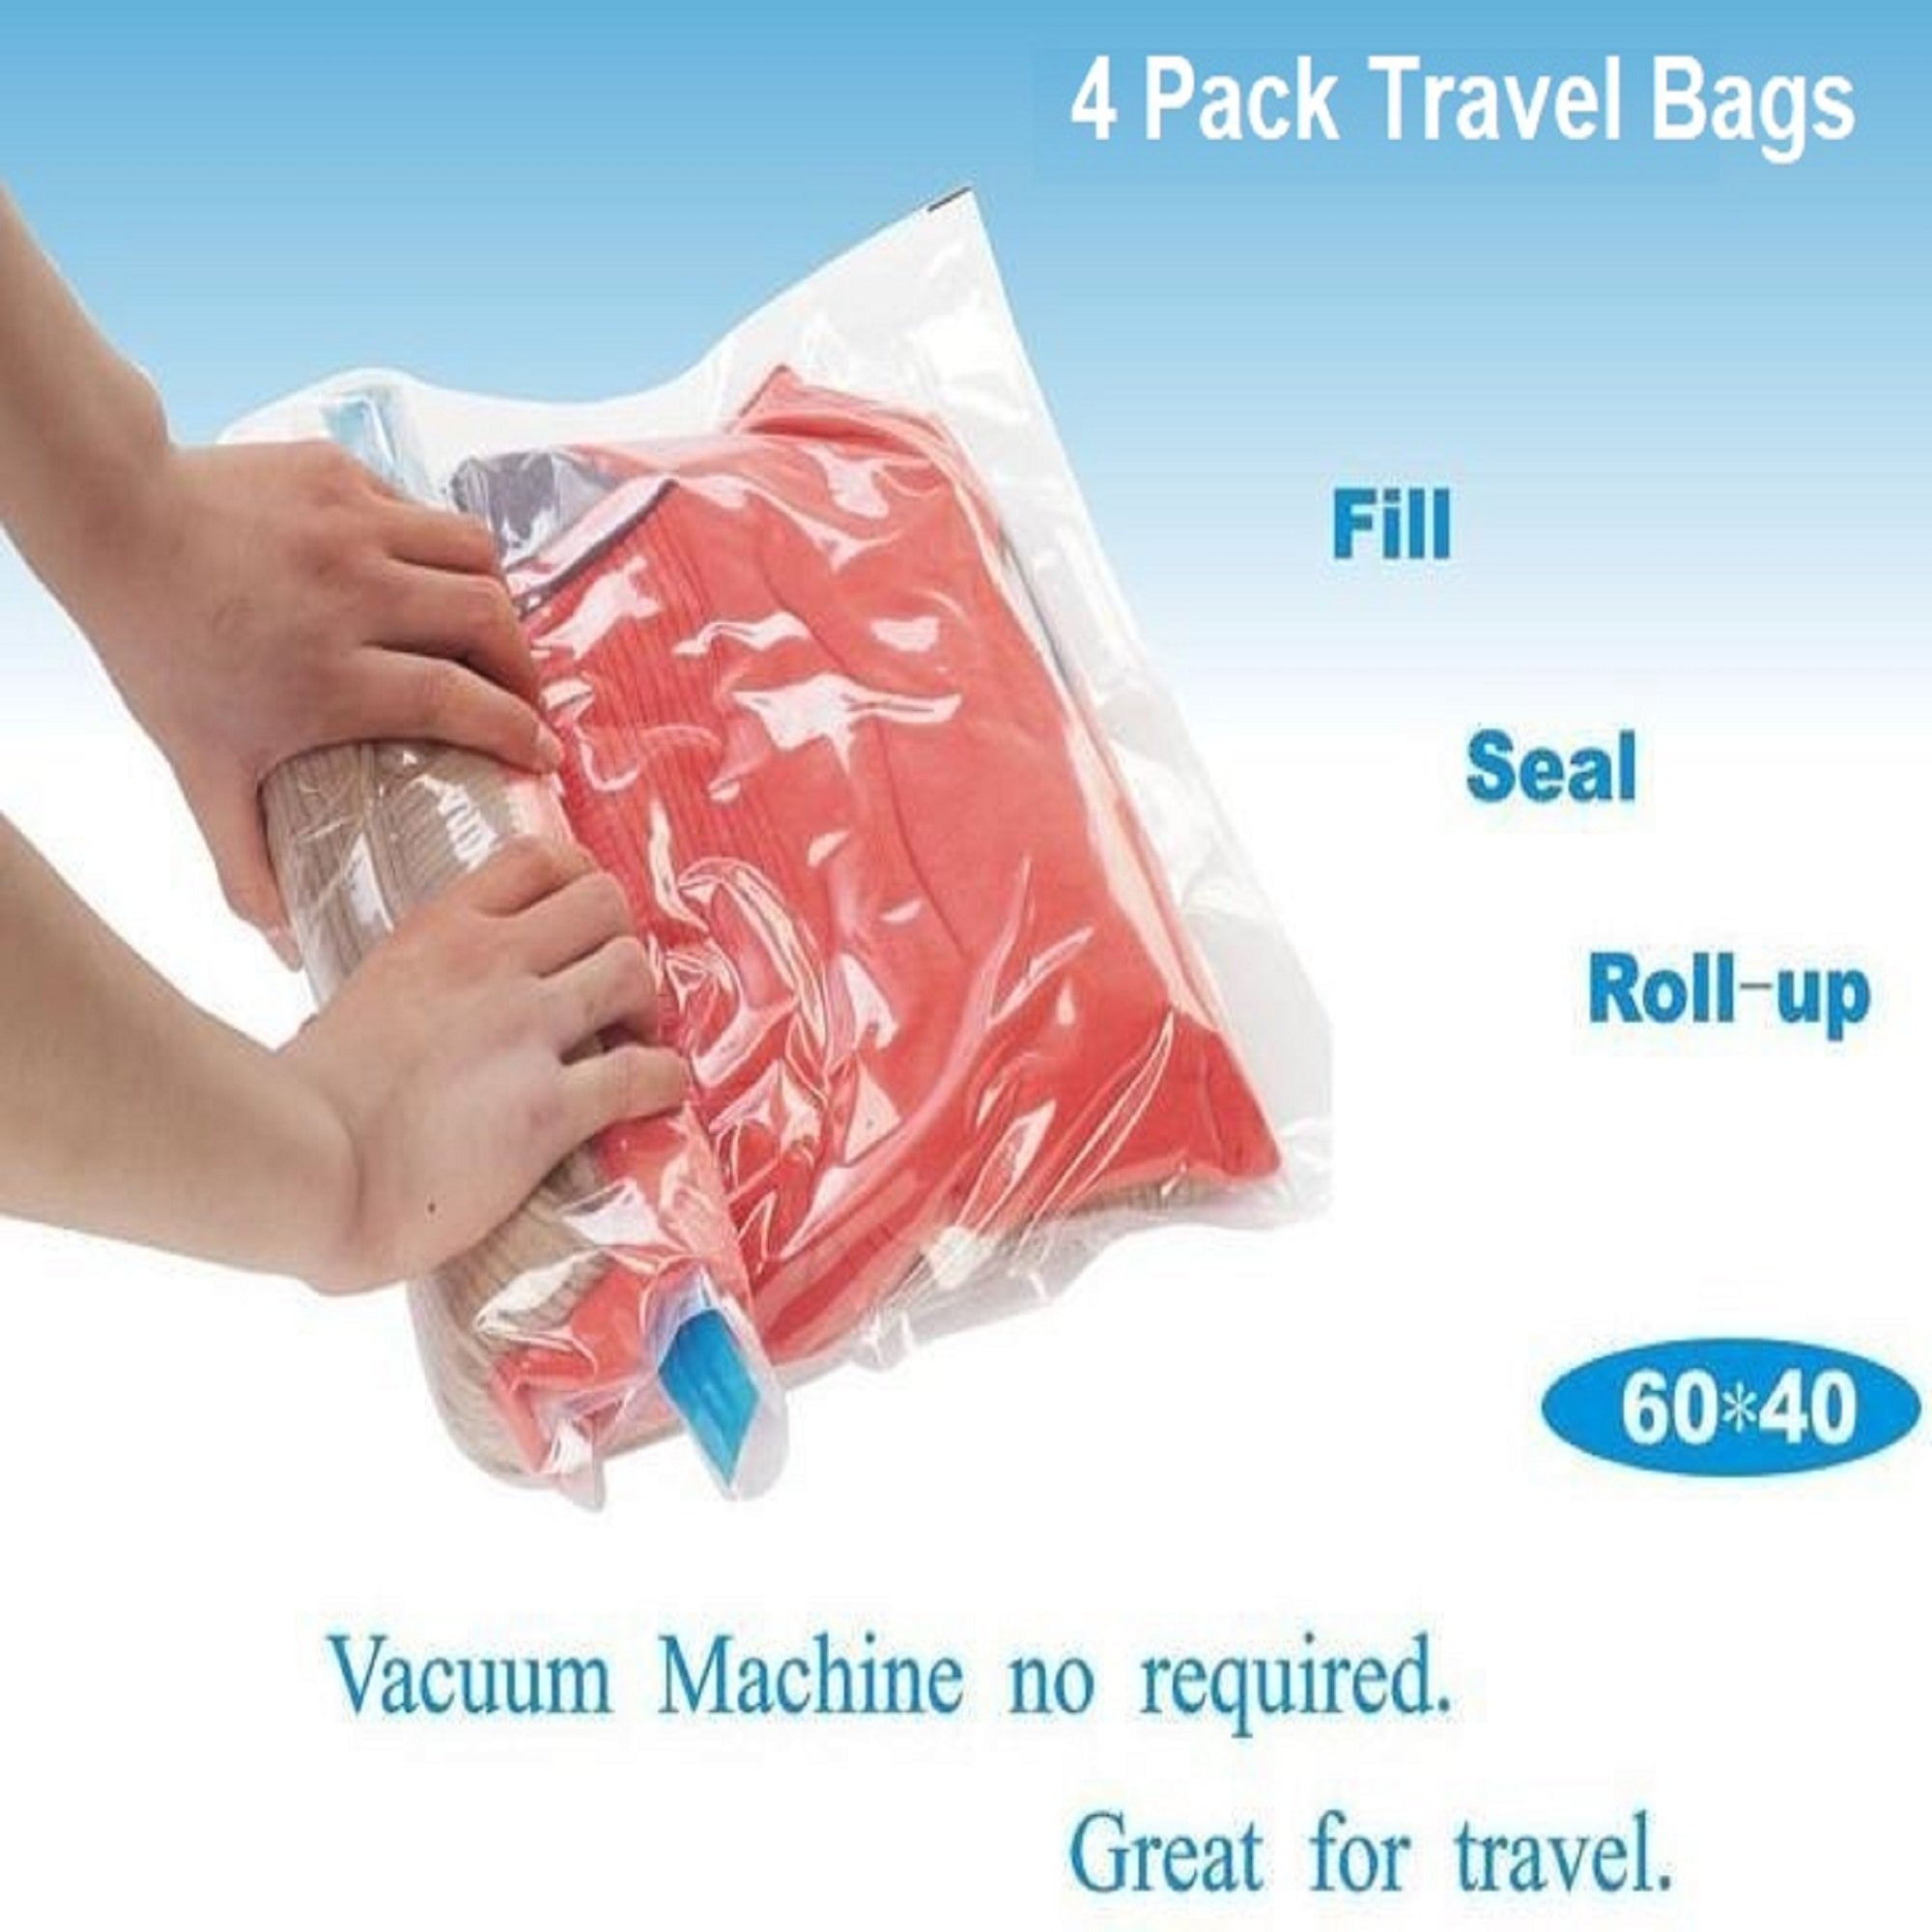 10 Combo Pack: 6 Pieces 51x40 The Largest Size Space Saver Storage Vacuum  Seal Organizer Plastic Bag + 4 Travel Roll Up Bags